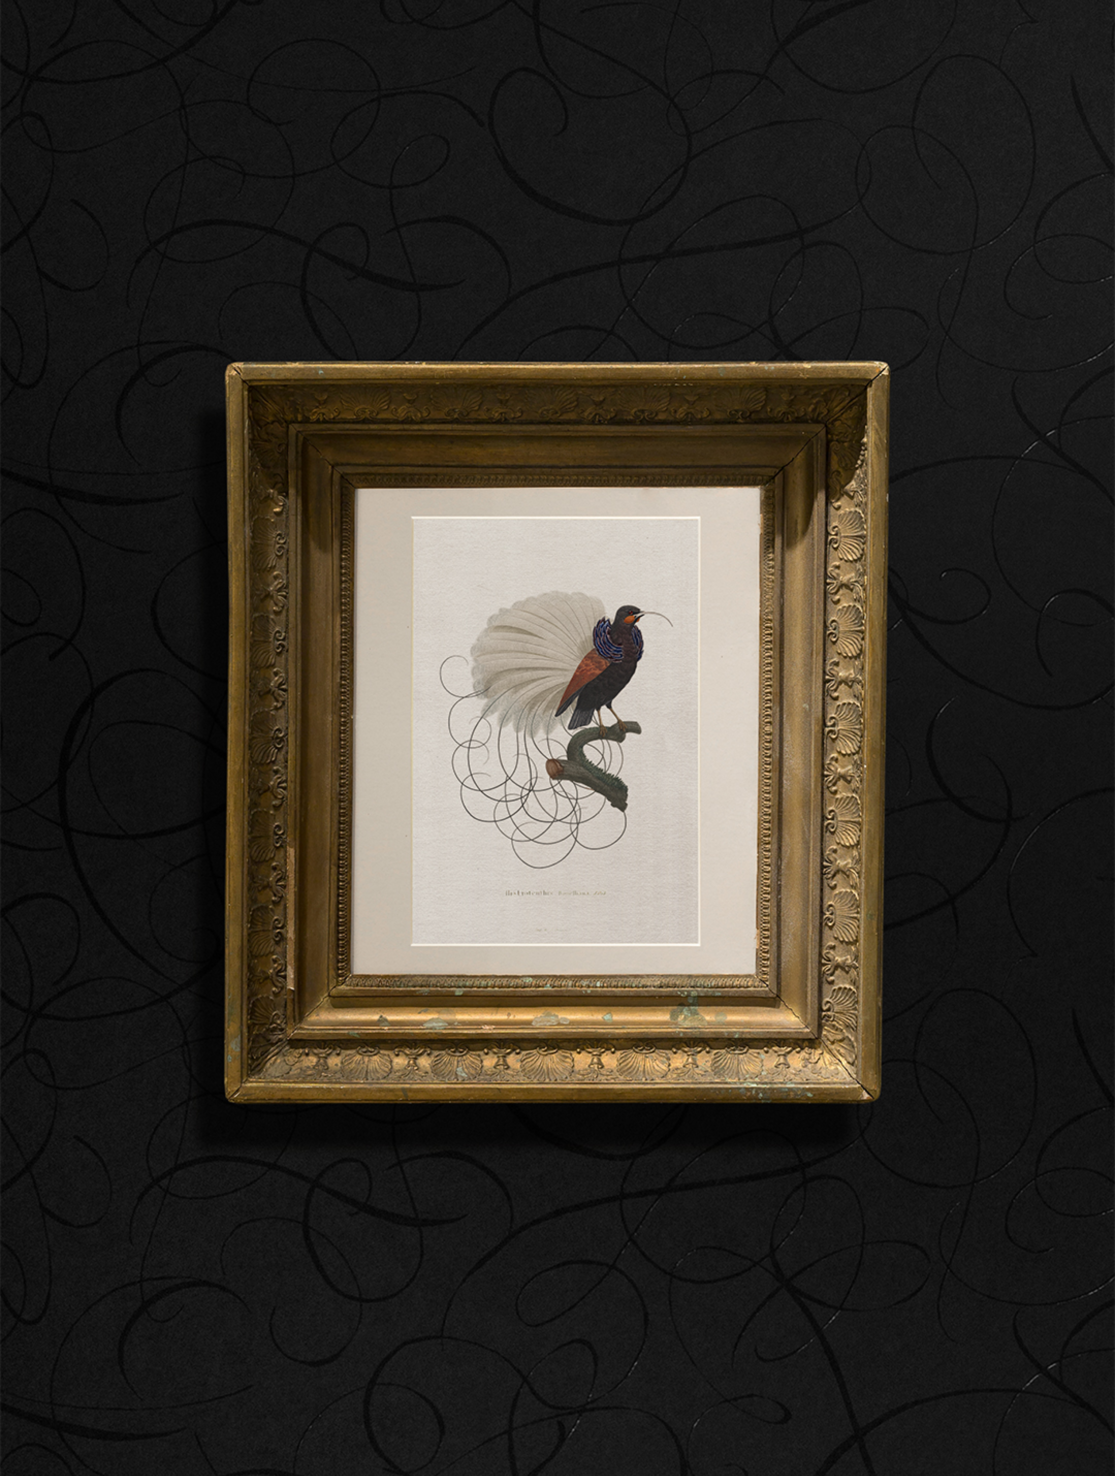 Moooi Calligraphy Bird drawing in a golden frame.